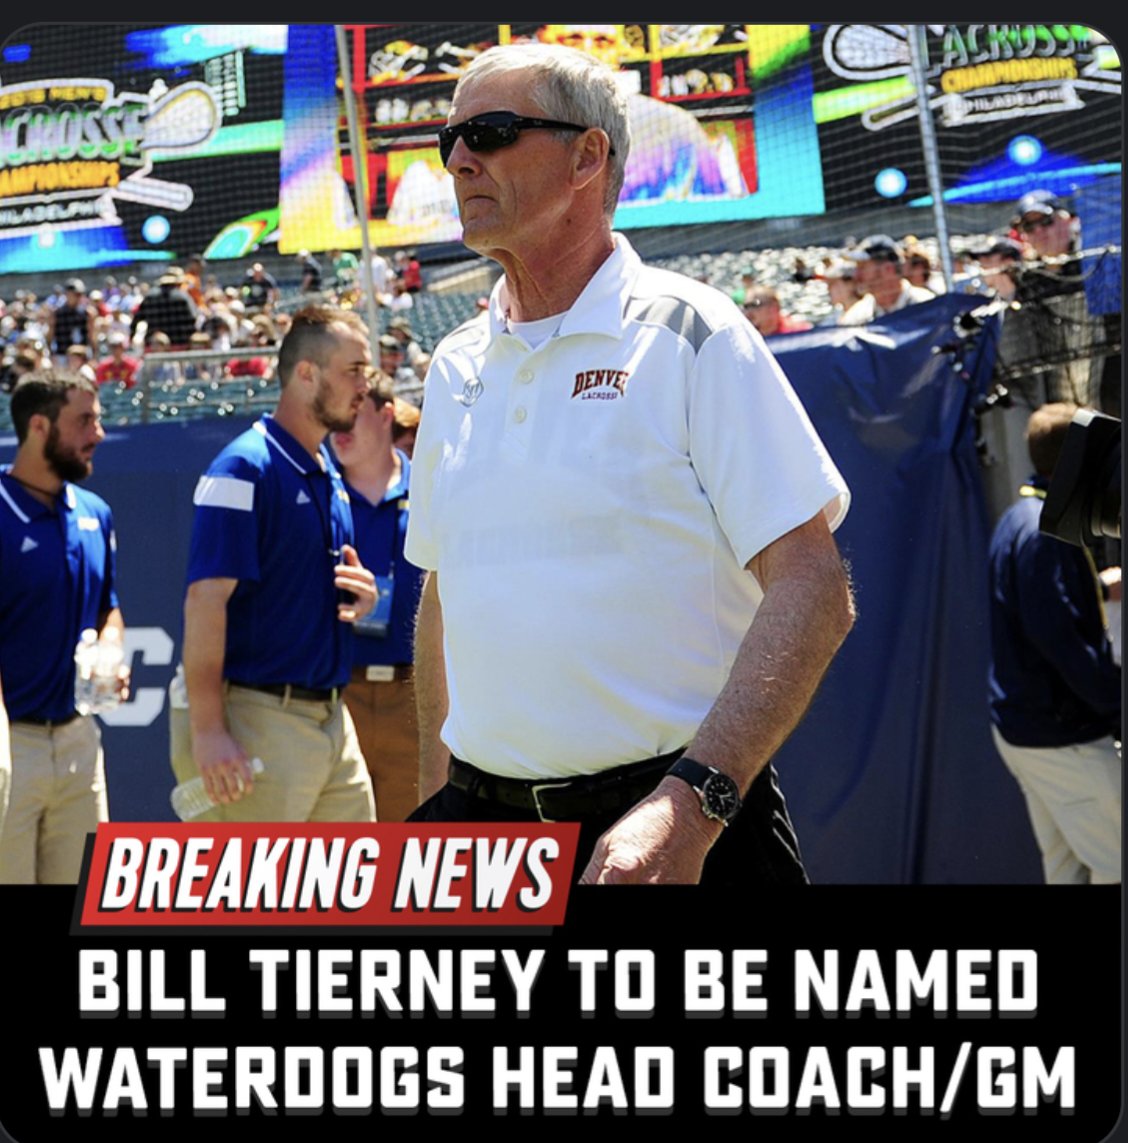 Multiple sources have confirmed Bill Tierney will be the new Head Coach/GM of the Philadelphia Waterdogs. Further details to come on @Inside_Lacrosse.